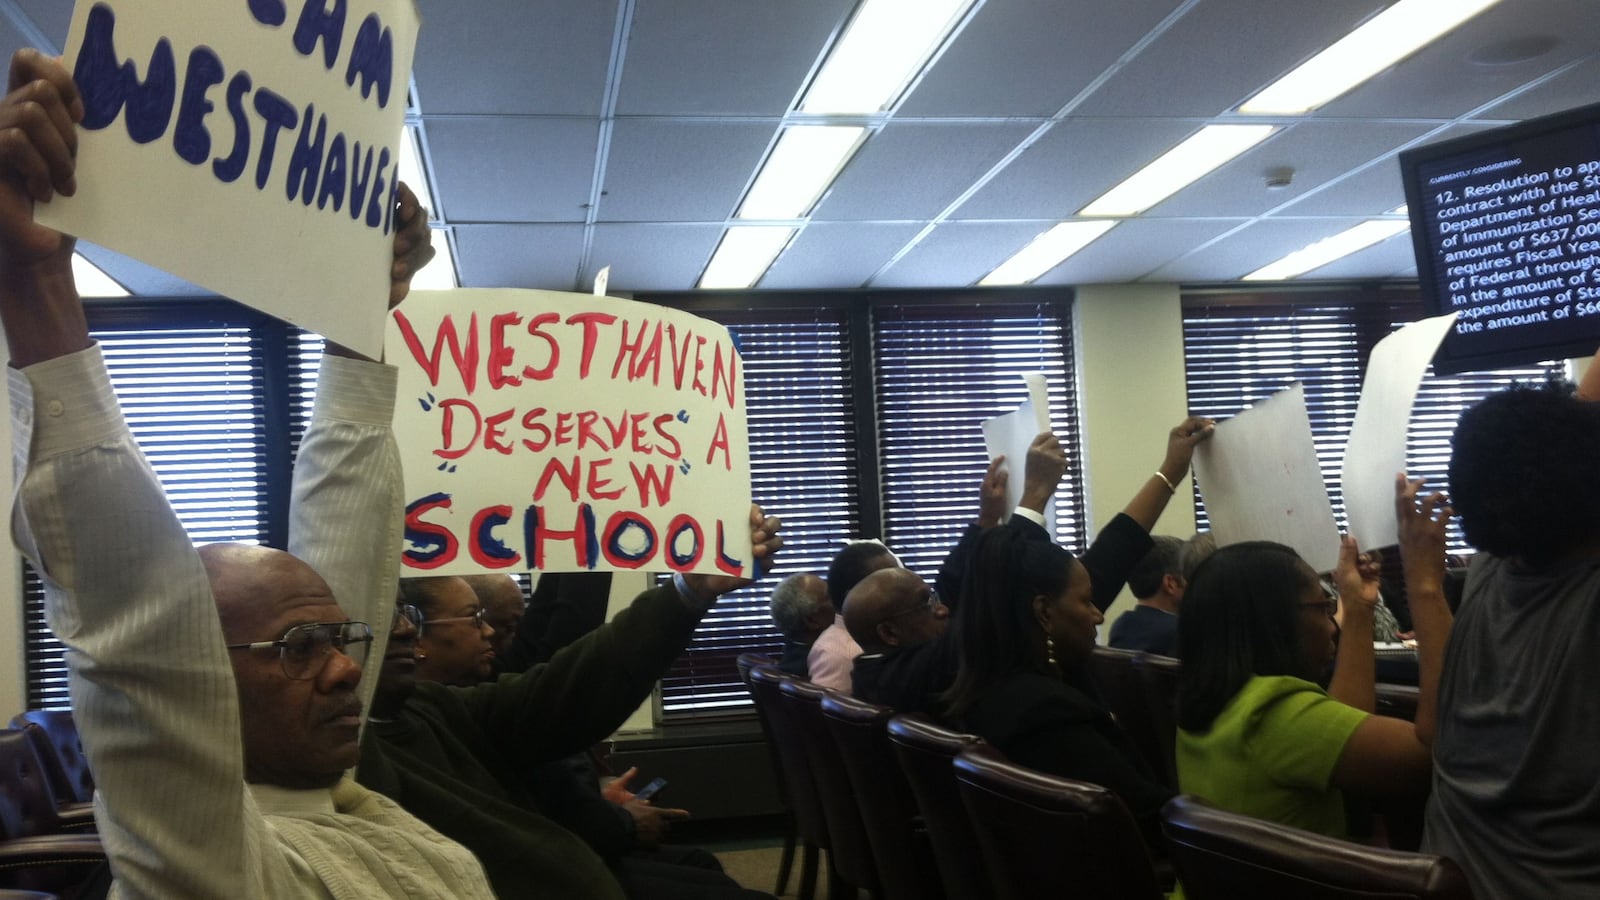 Supporters of Westhaven Elementary School at County Commission meeting.